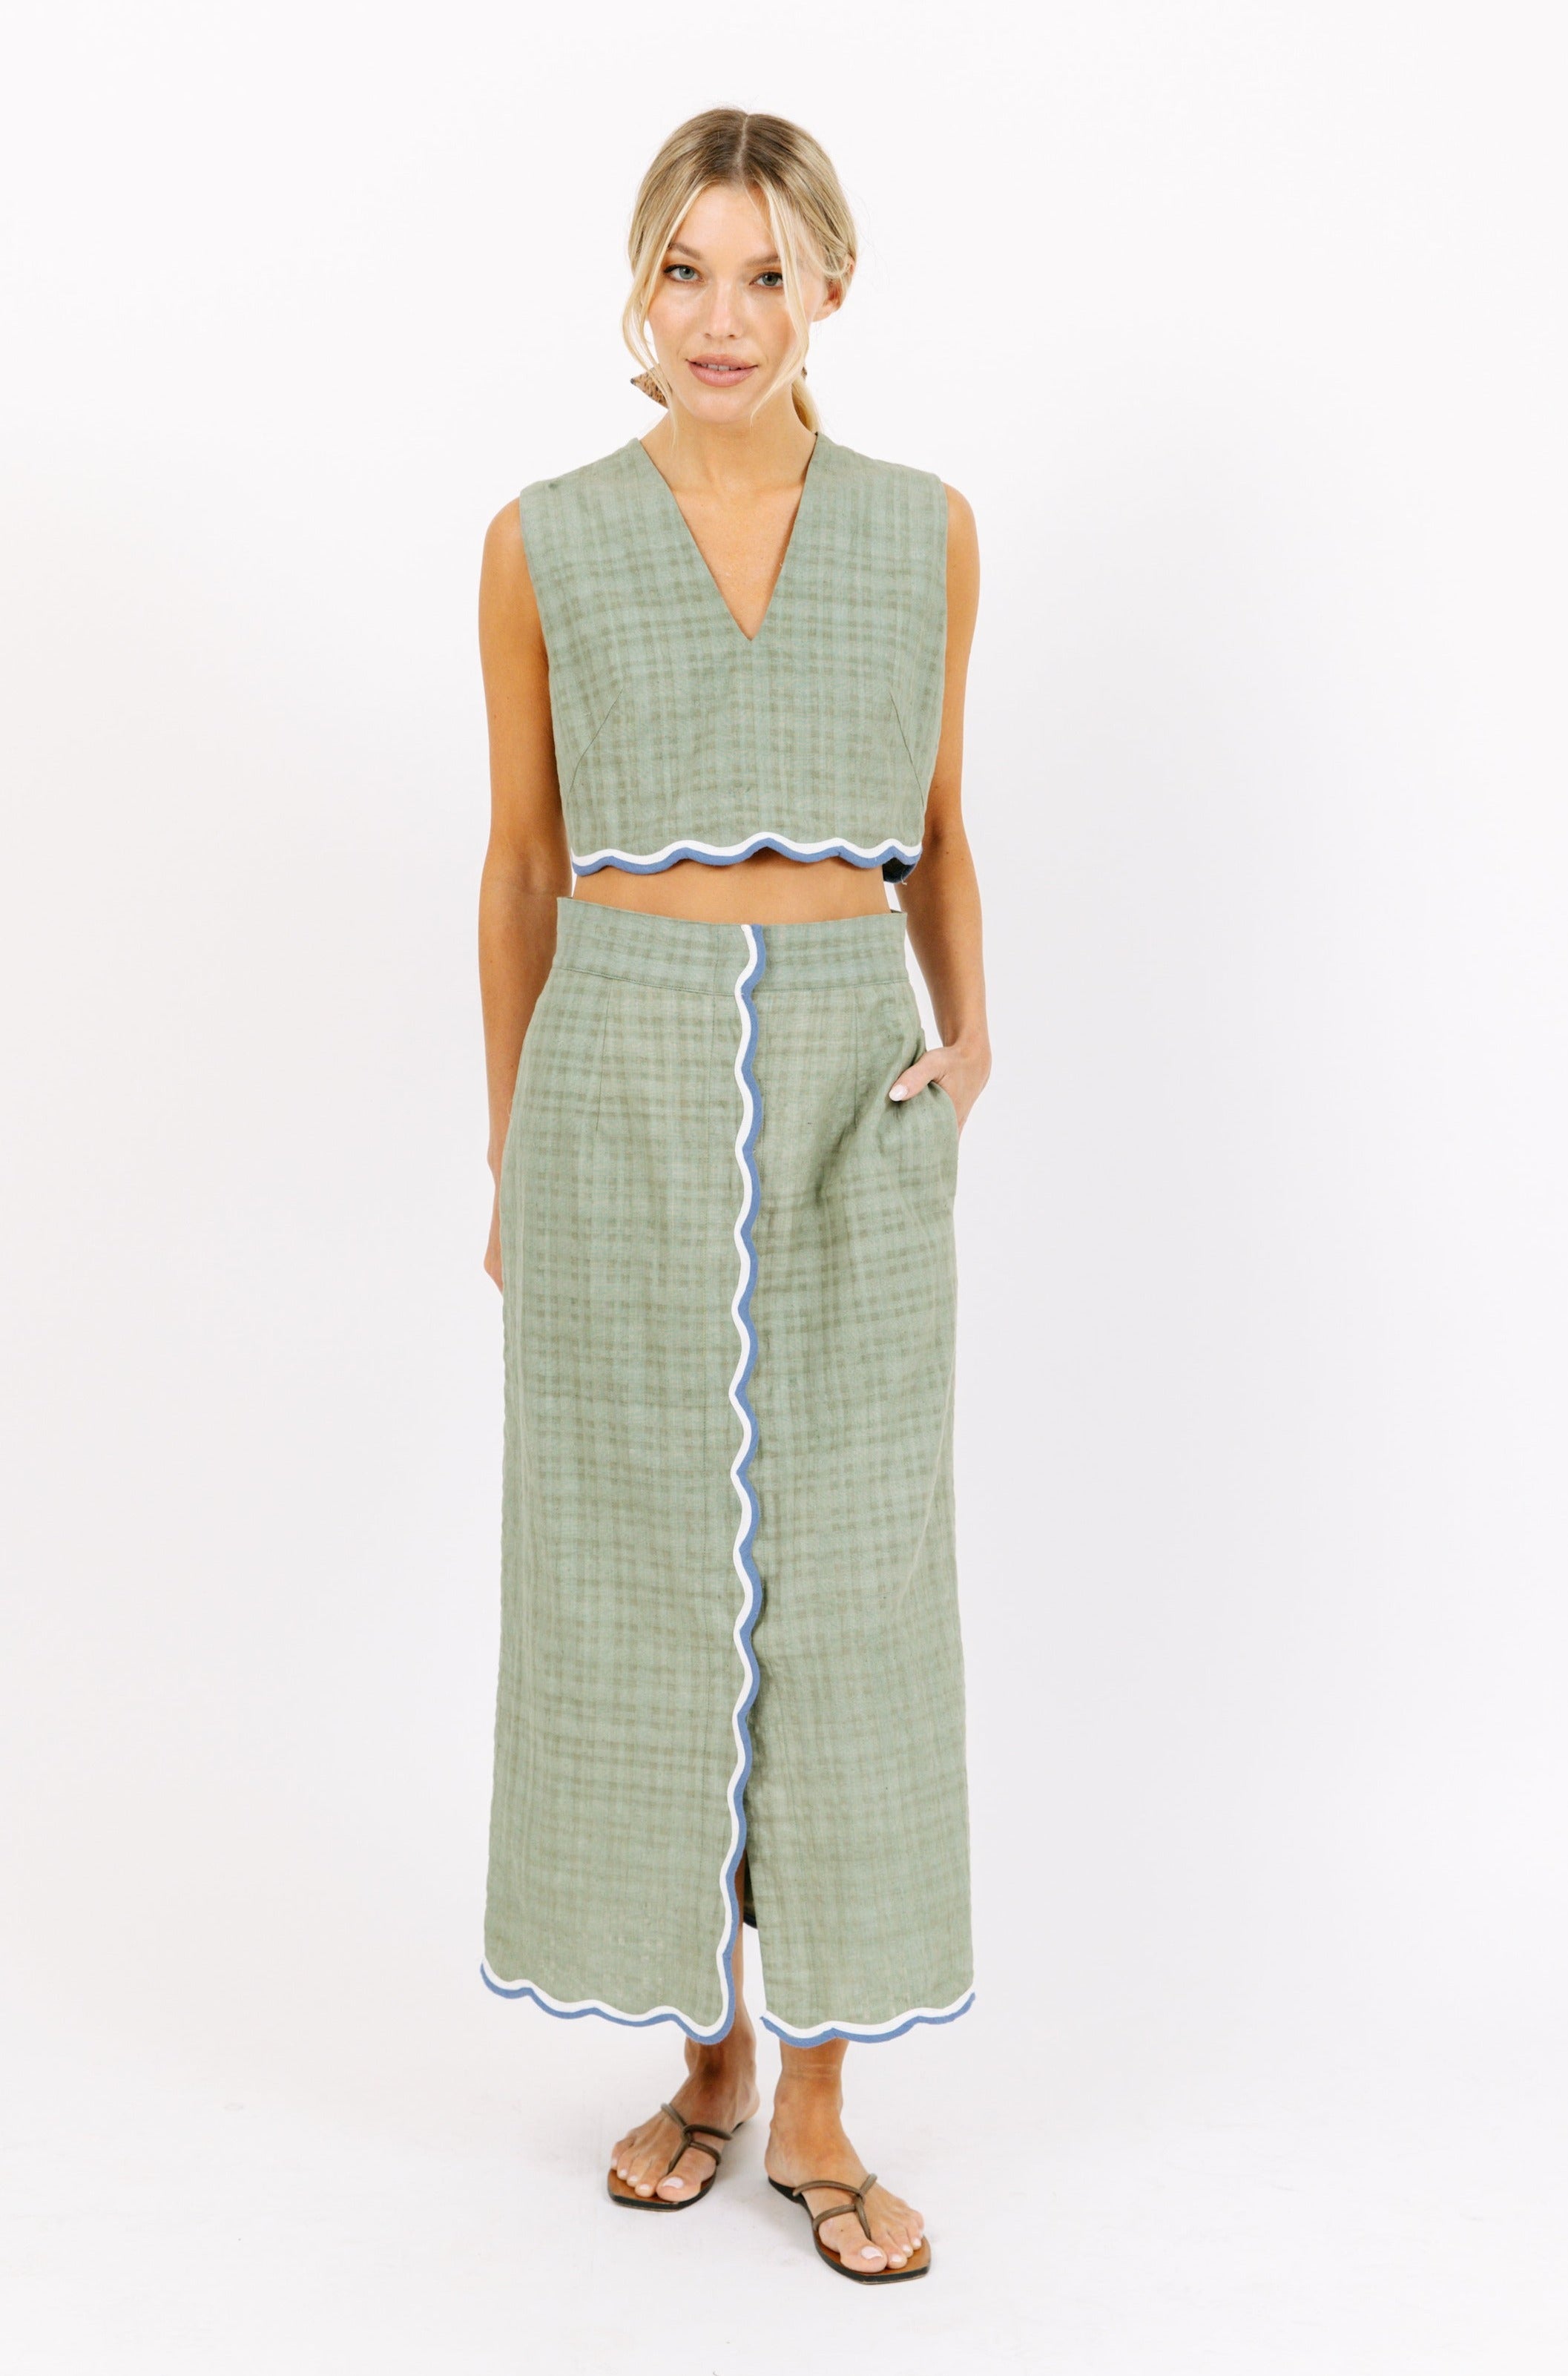 MIRTH long cotton bondi pencil skirt set in willow green with scallop